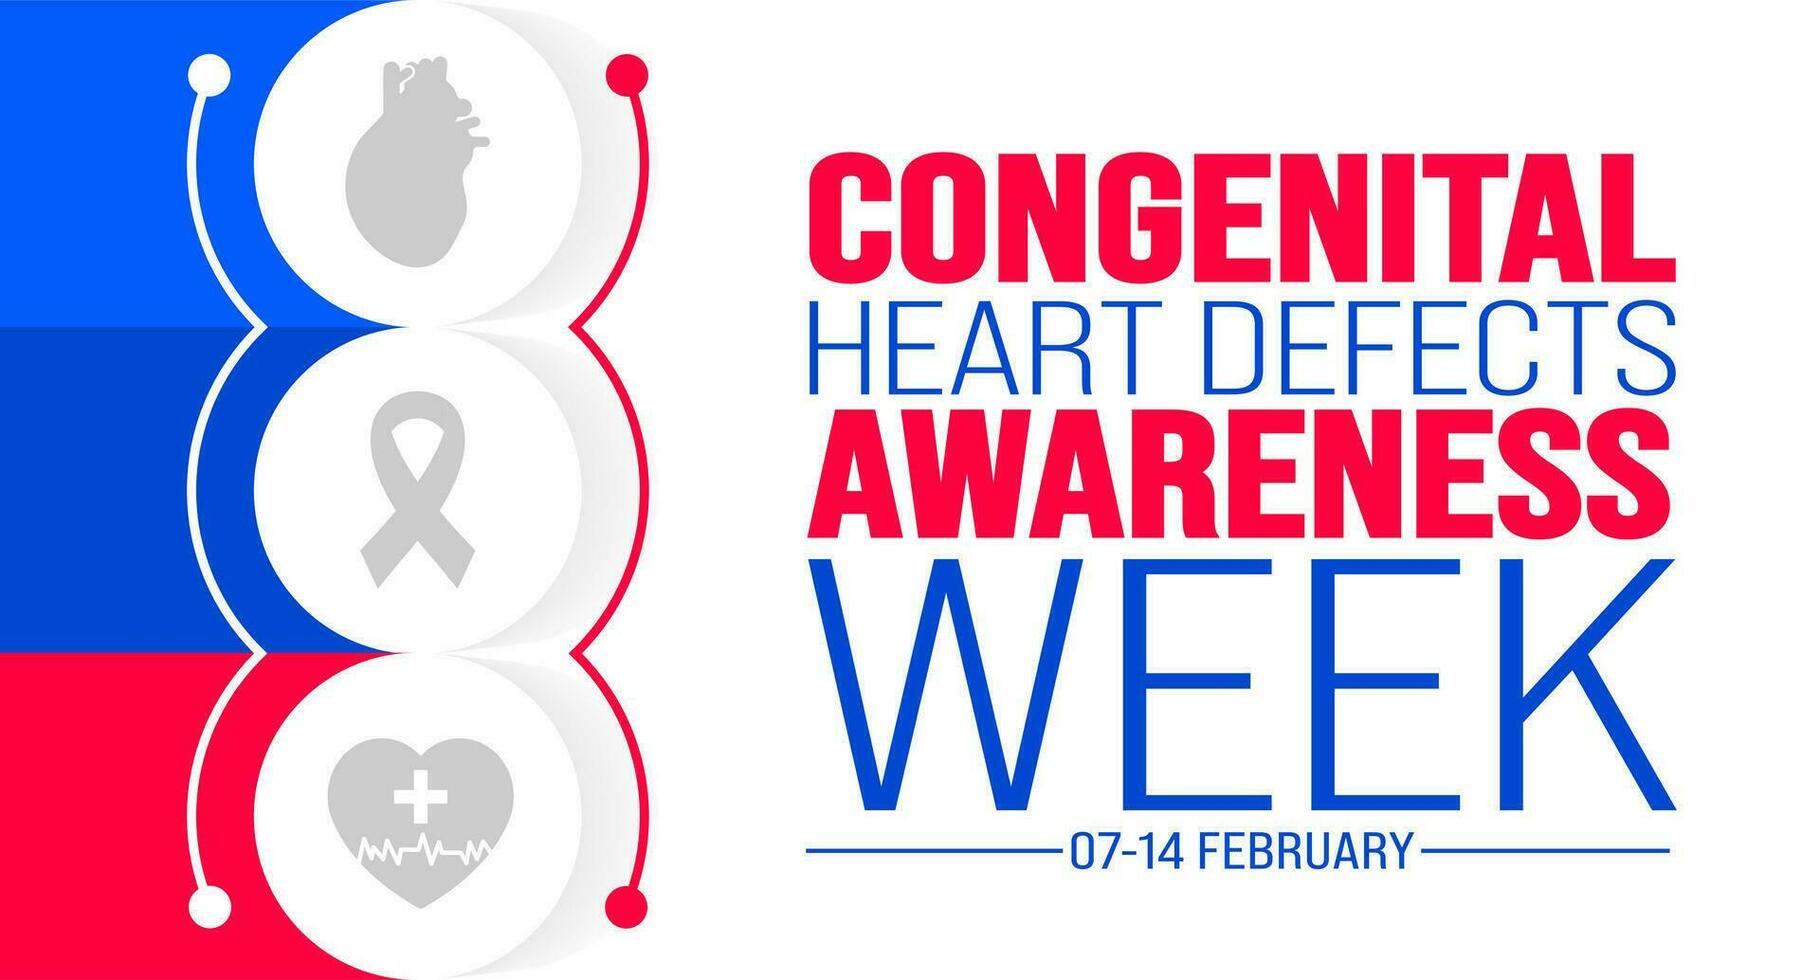 February is Congenital Heart Defects Awareness Week background template. Holiday concept. background, banner, placard, card, and poster design template with text inscription and standard color. vector